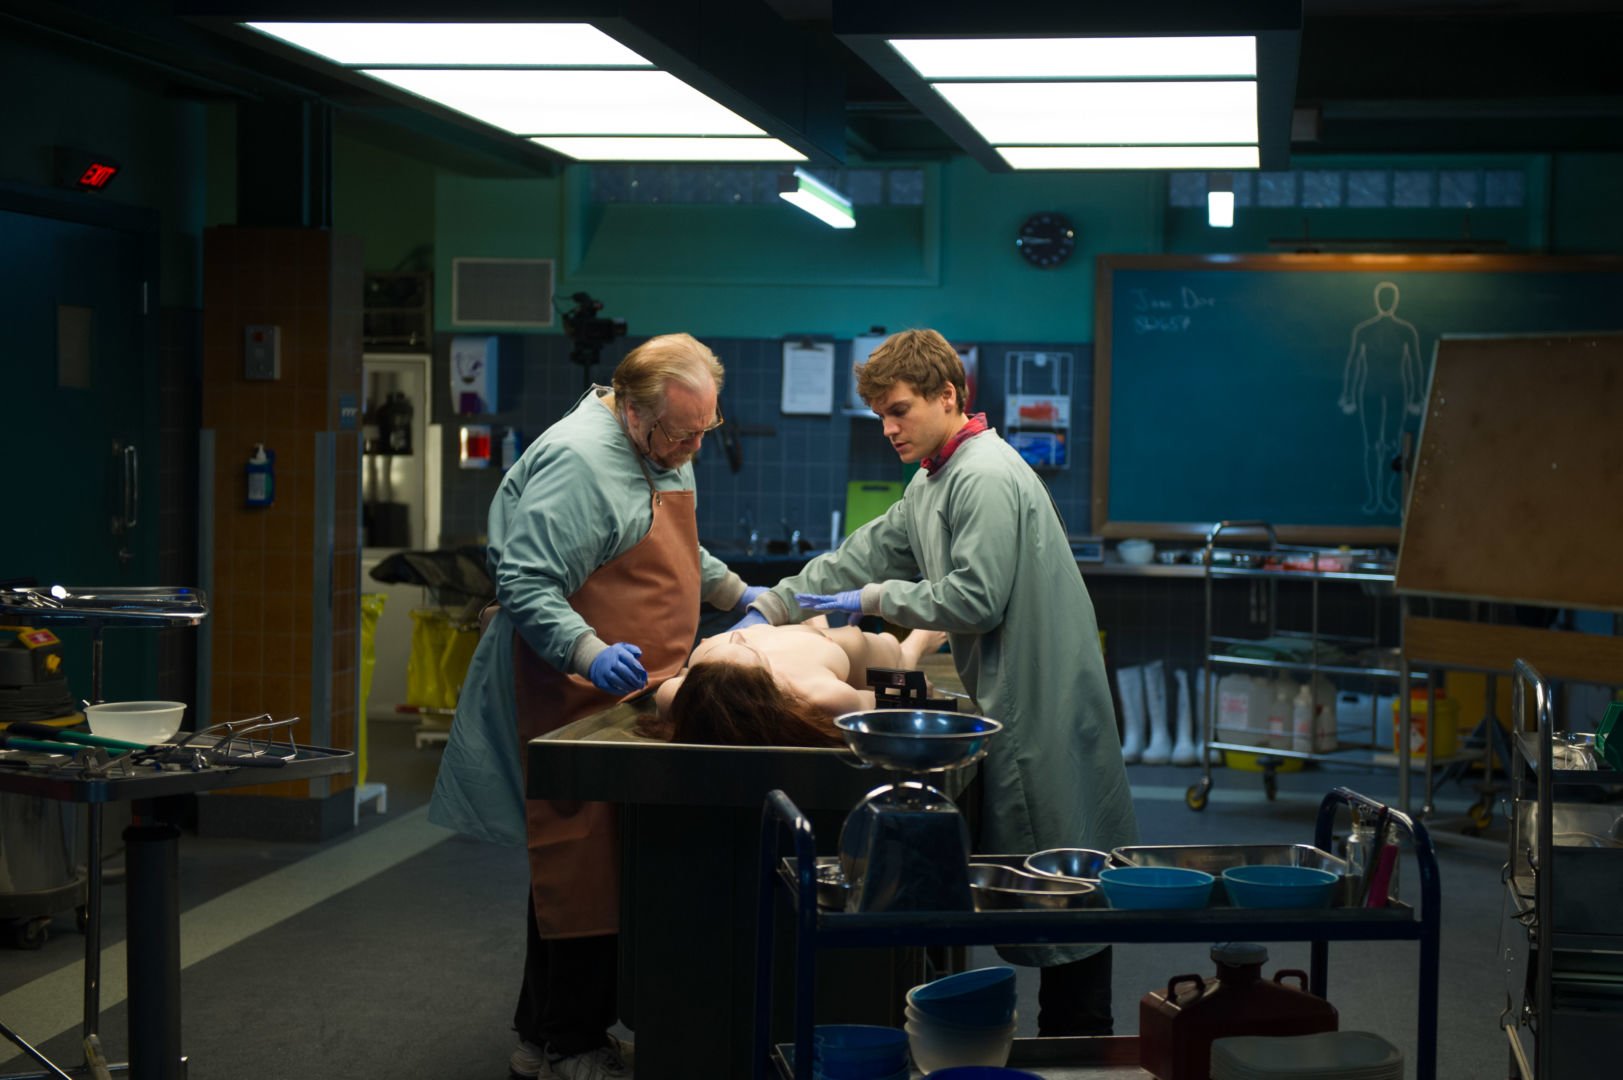 The Autopsy of Jane Doe - Review: Ένα άγνωστο διαμαντάκι τρόμου 1